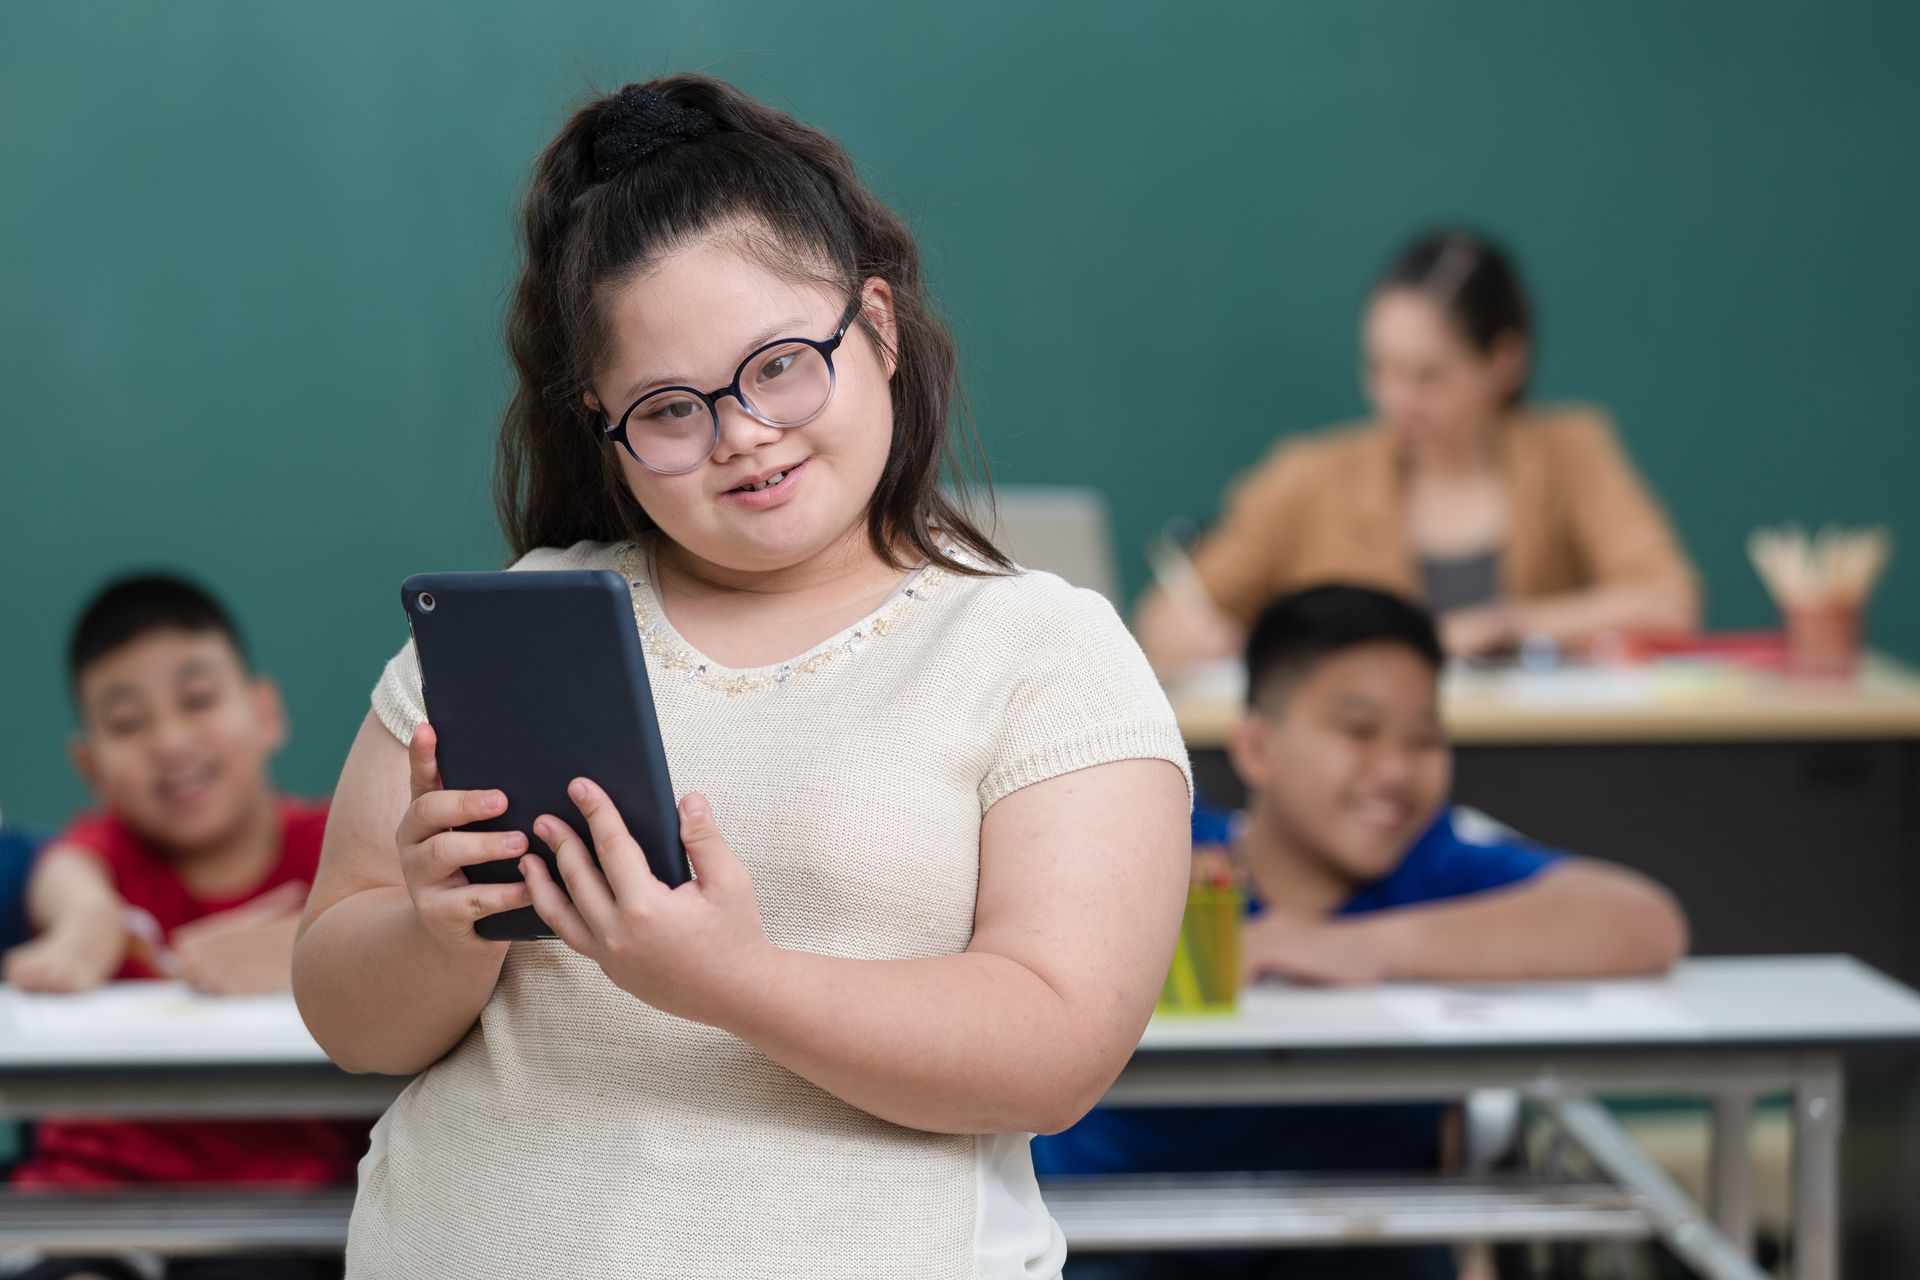 A young girl with Down Syndrome smiles as she uses a tablet in her classroom.